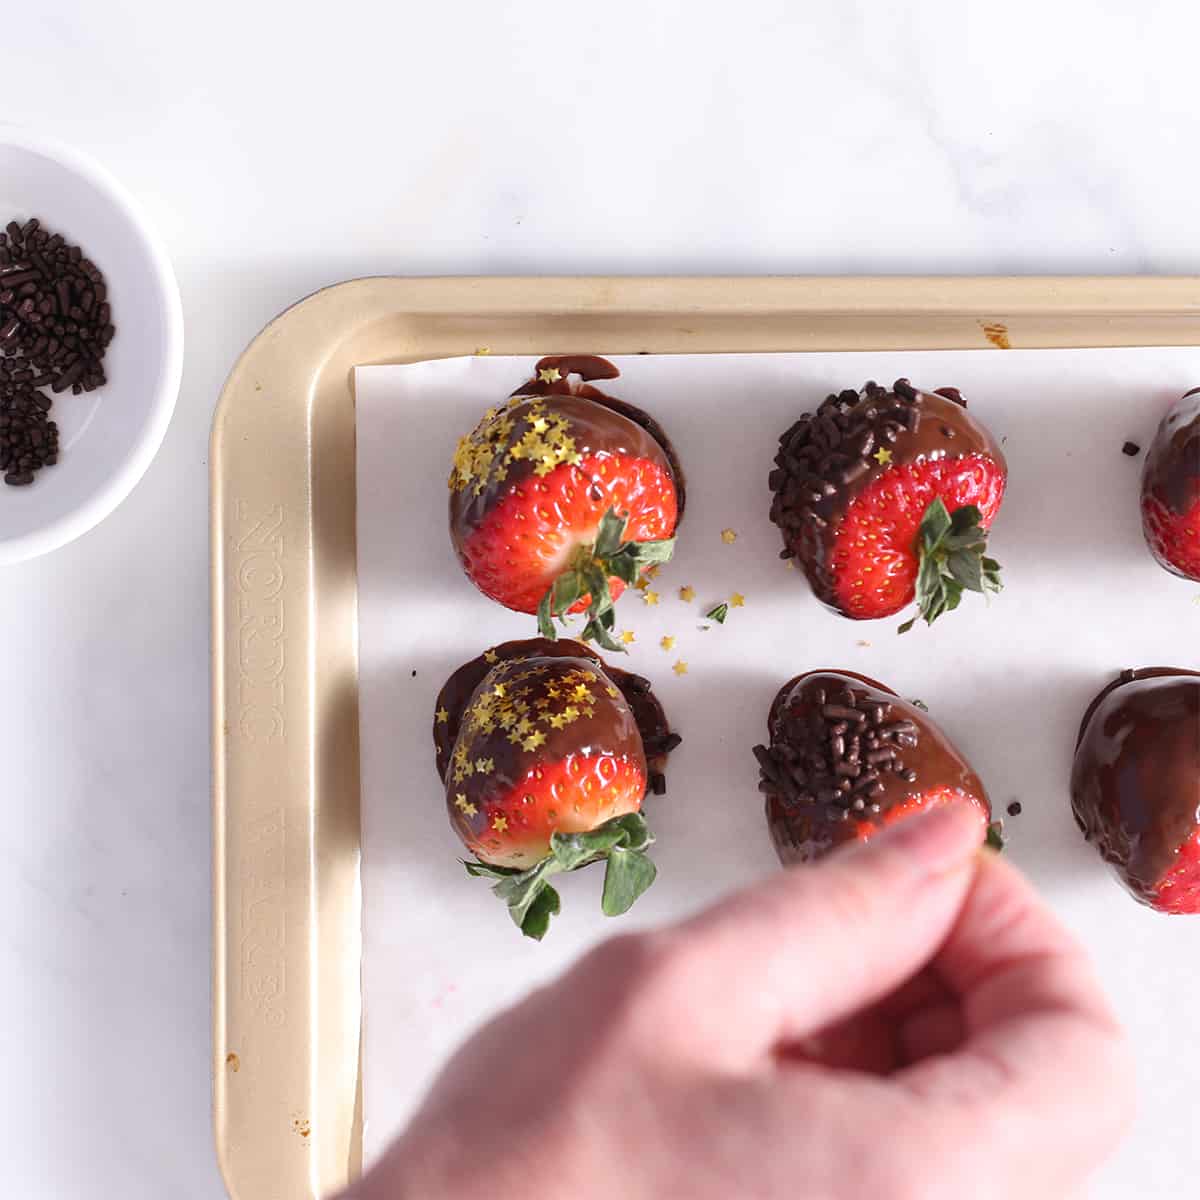 dipped chocolate covered strawberries on a tray.